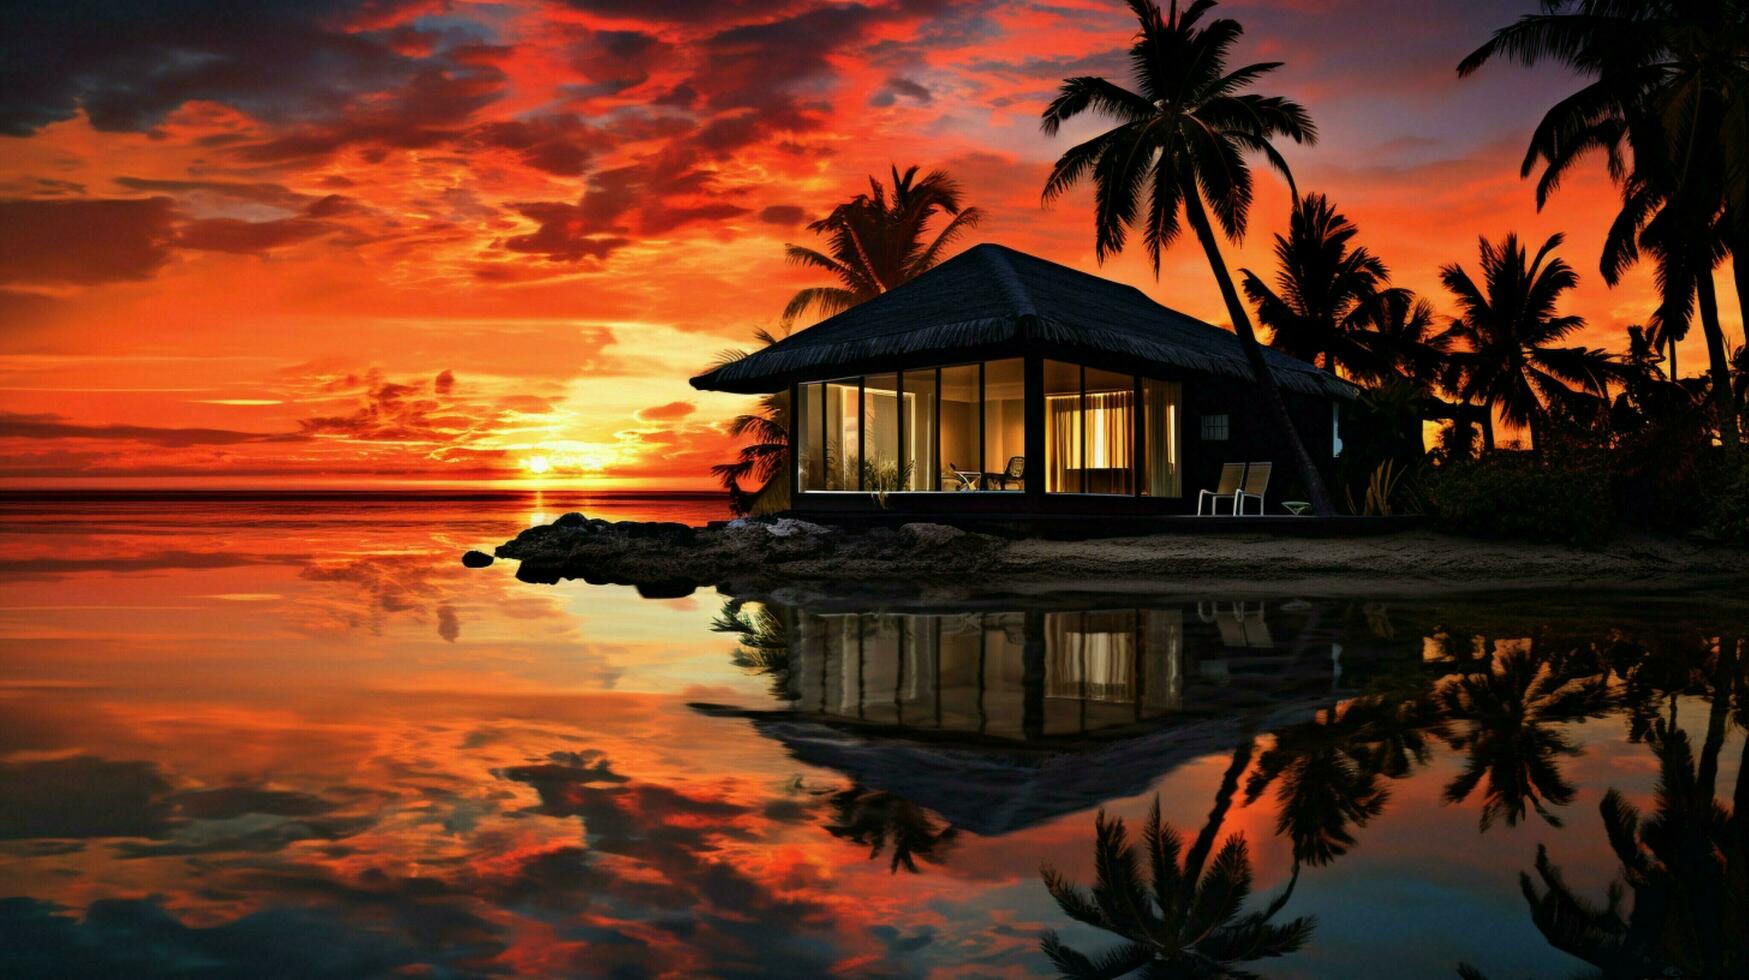 tranquil bungalow reflection silhouettes caribbean sunset photo